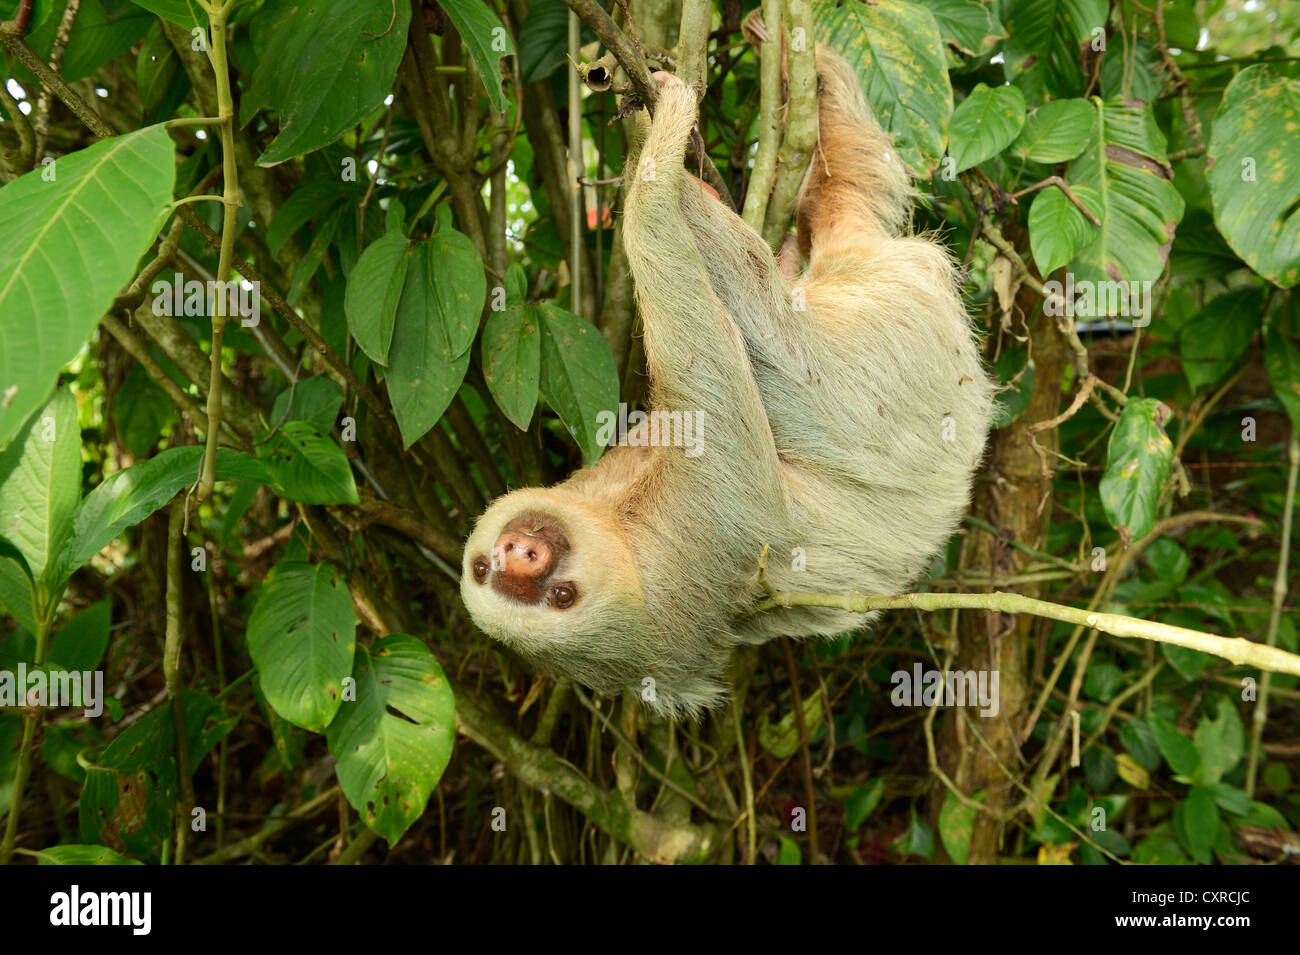 Hoffmann's two-toed sloth (Choloepus hoffmanni), hanging upside down in a tree, La Fortuna, Costa Rica, Central America Stock Photo